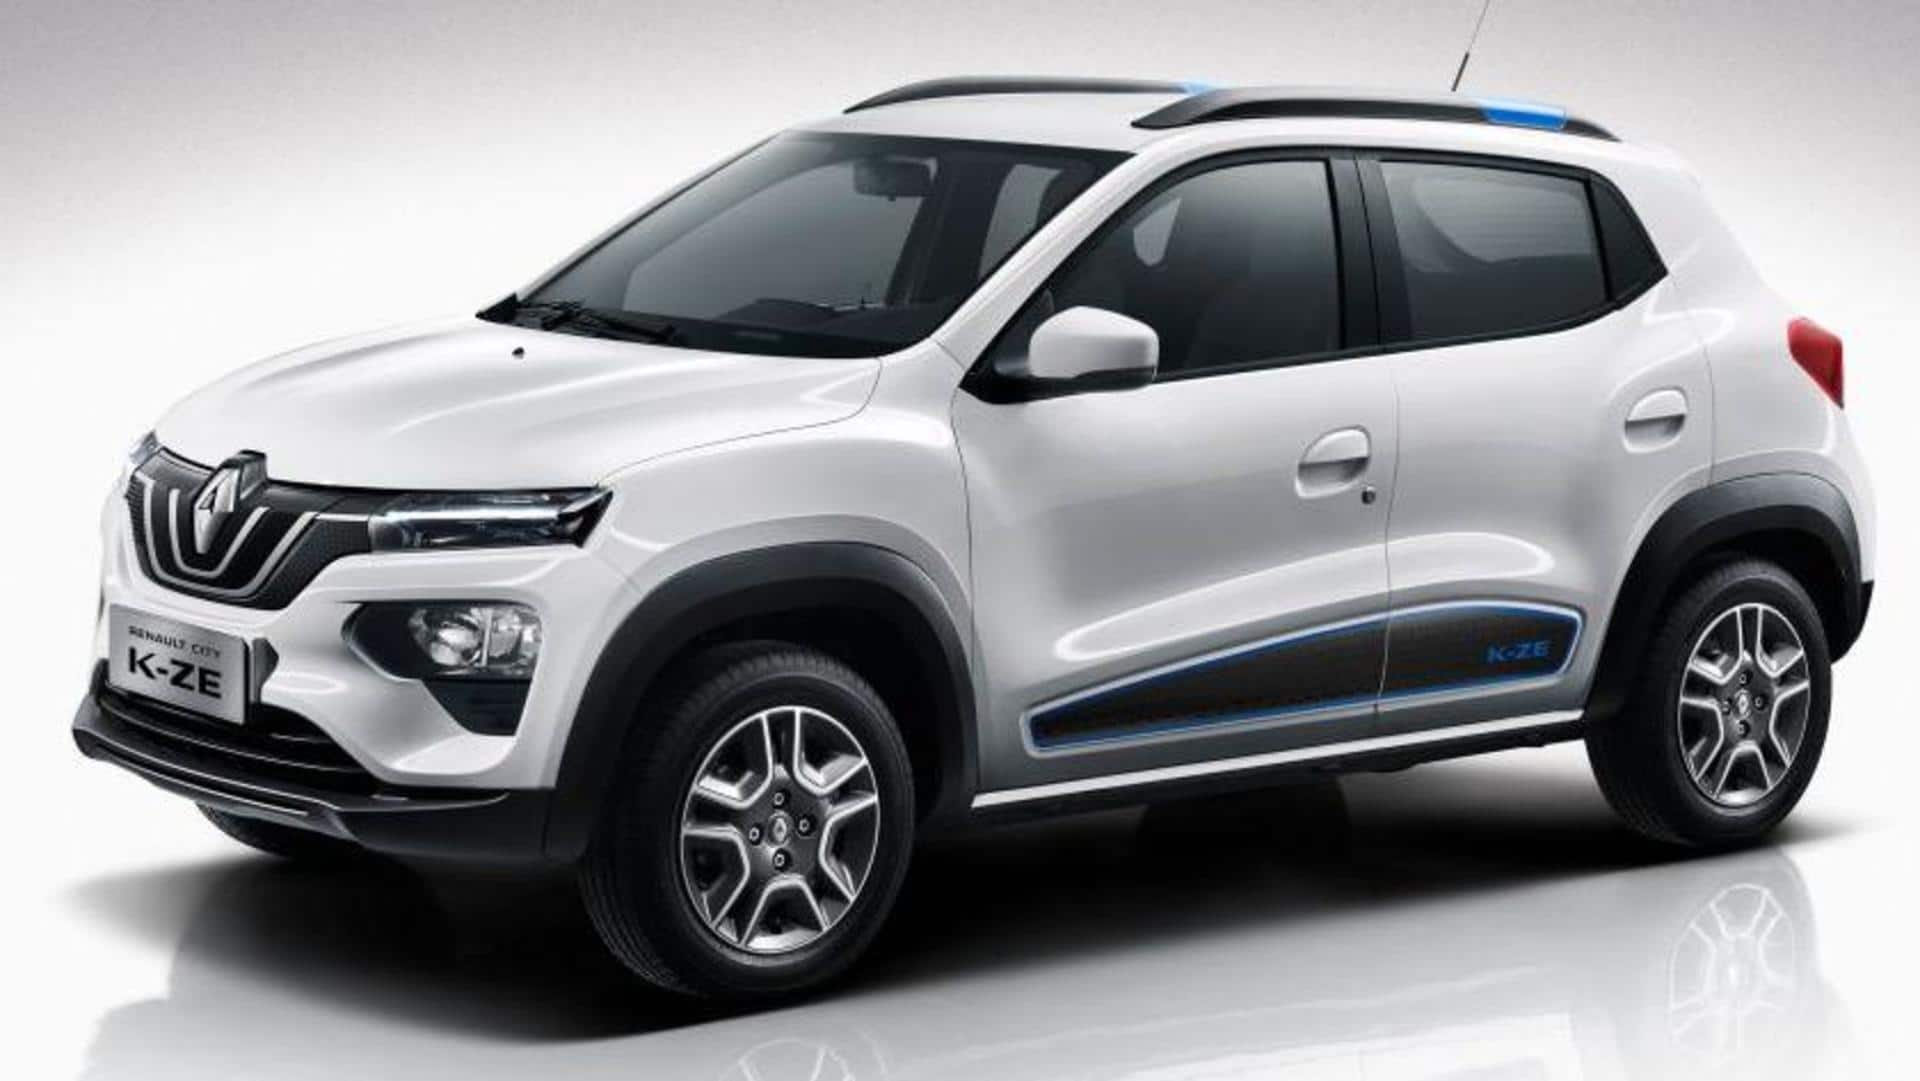 Renault's first electric car in India could be KWID EV